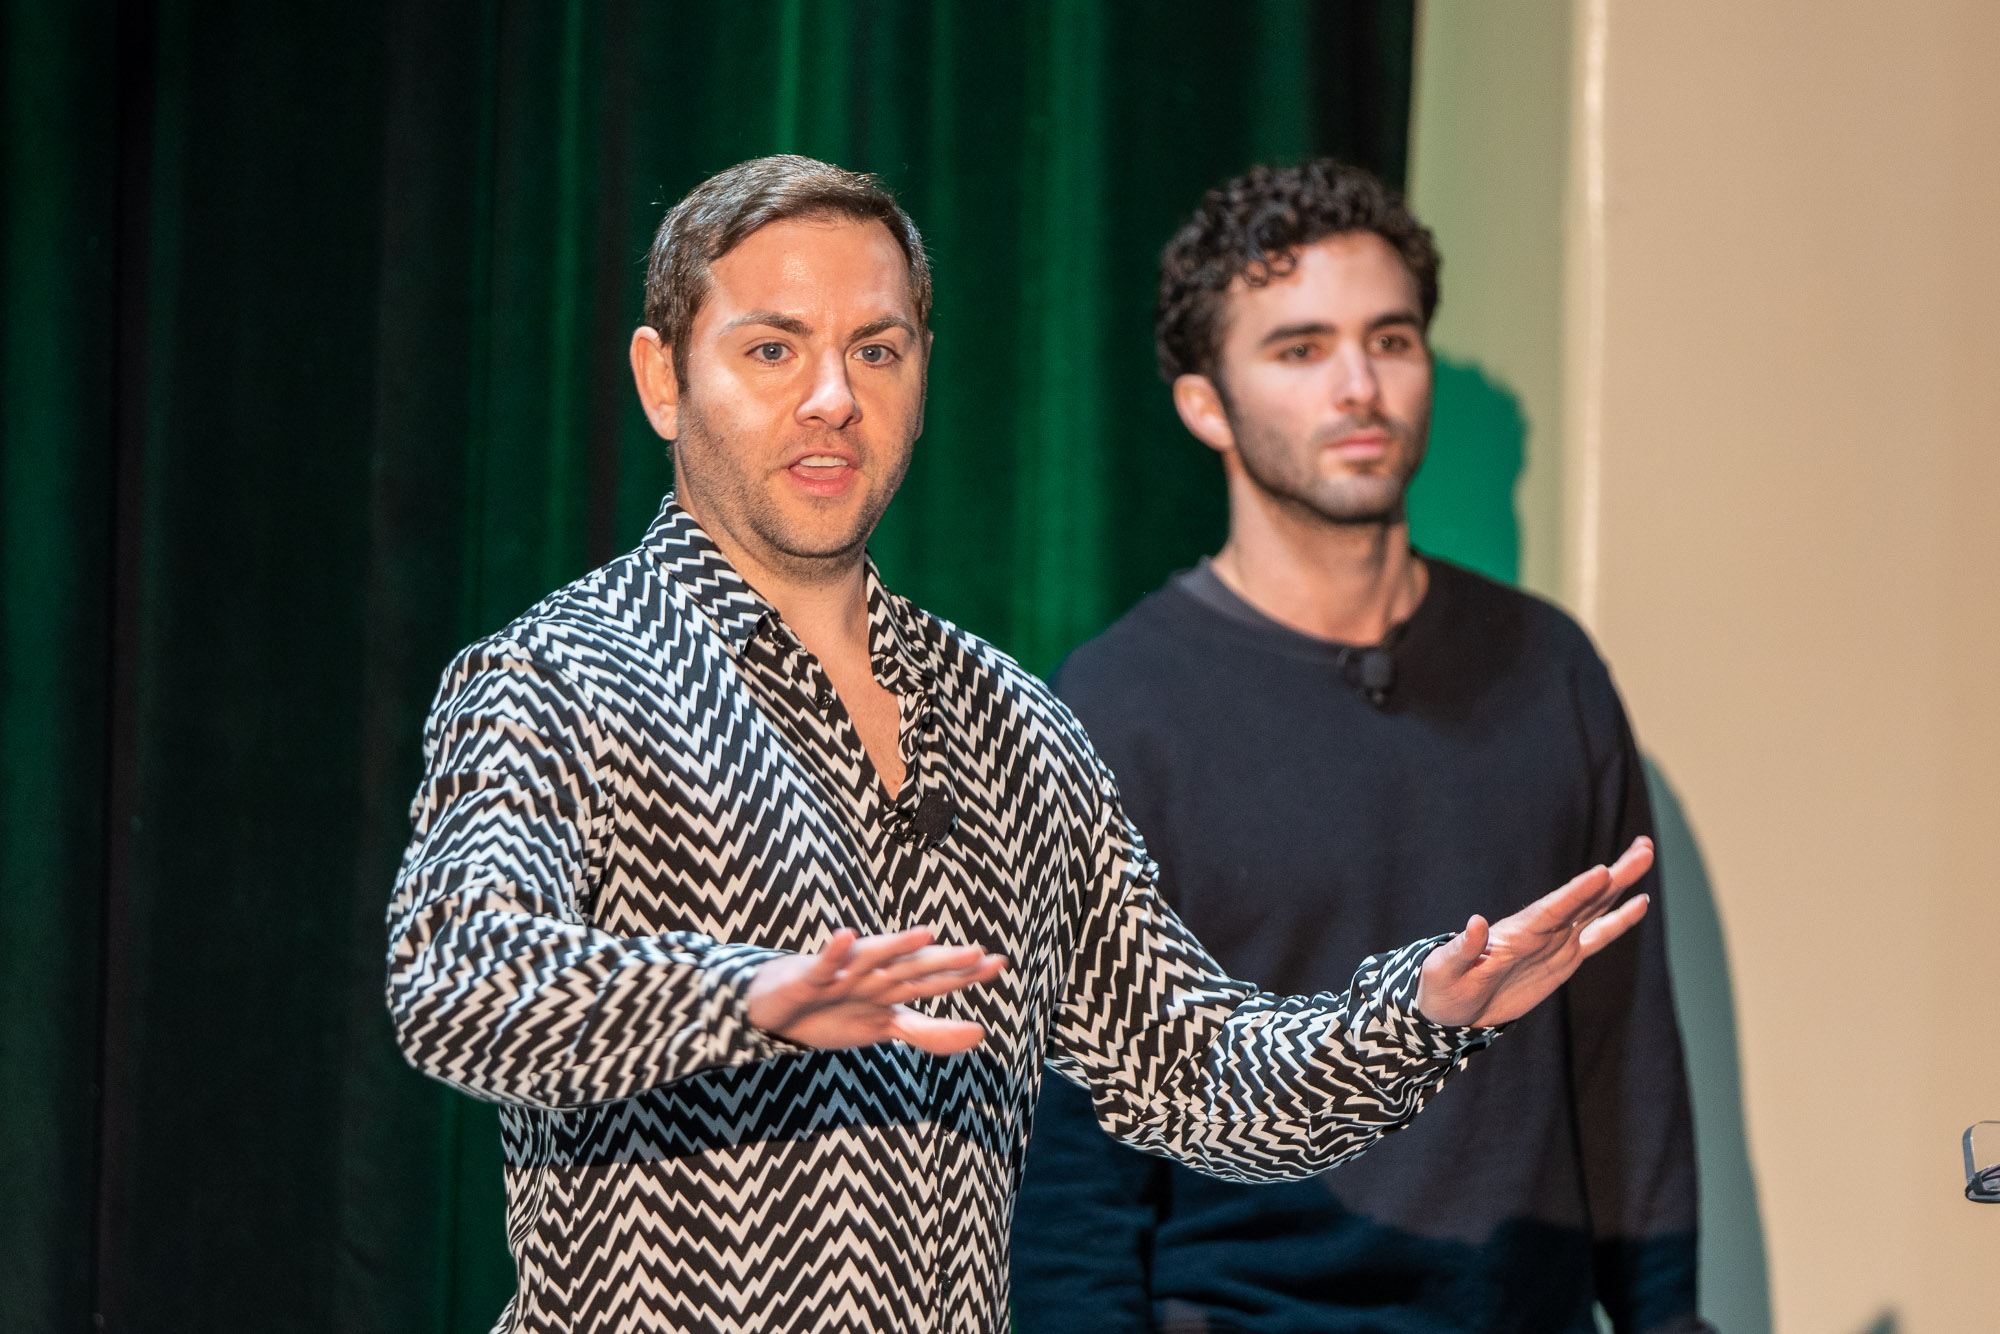 Redpoint Partner Josh Machiz and Redpoint Head of Content Rashad Assir talk "How to Turn Your Startup Into a Social Star" TechCrunch Early Stage in Boston on April 20, 2023. Image credit: Haje Jan Kamps/TechCrunch